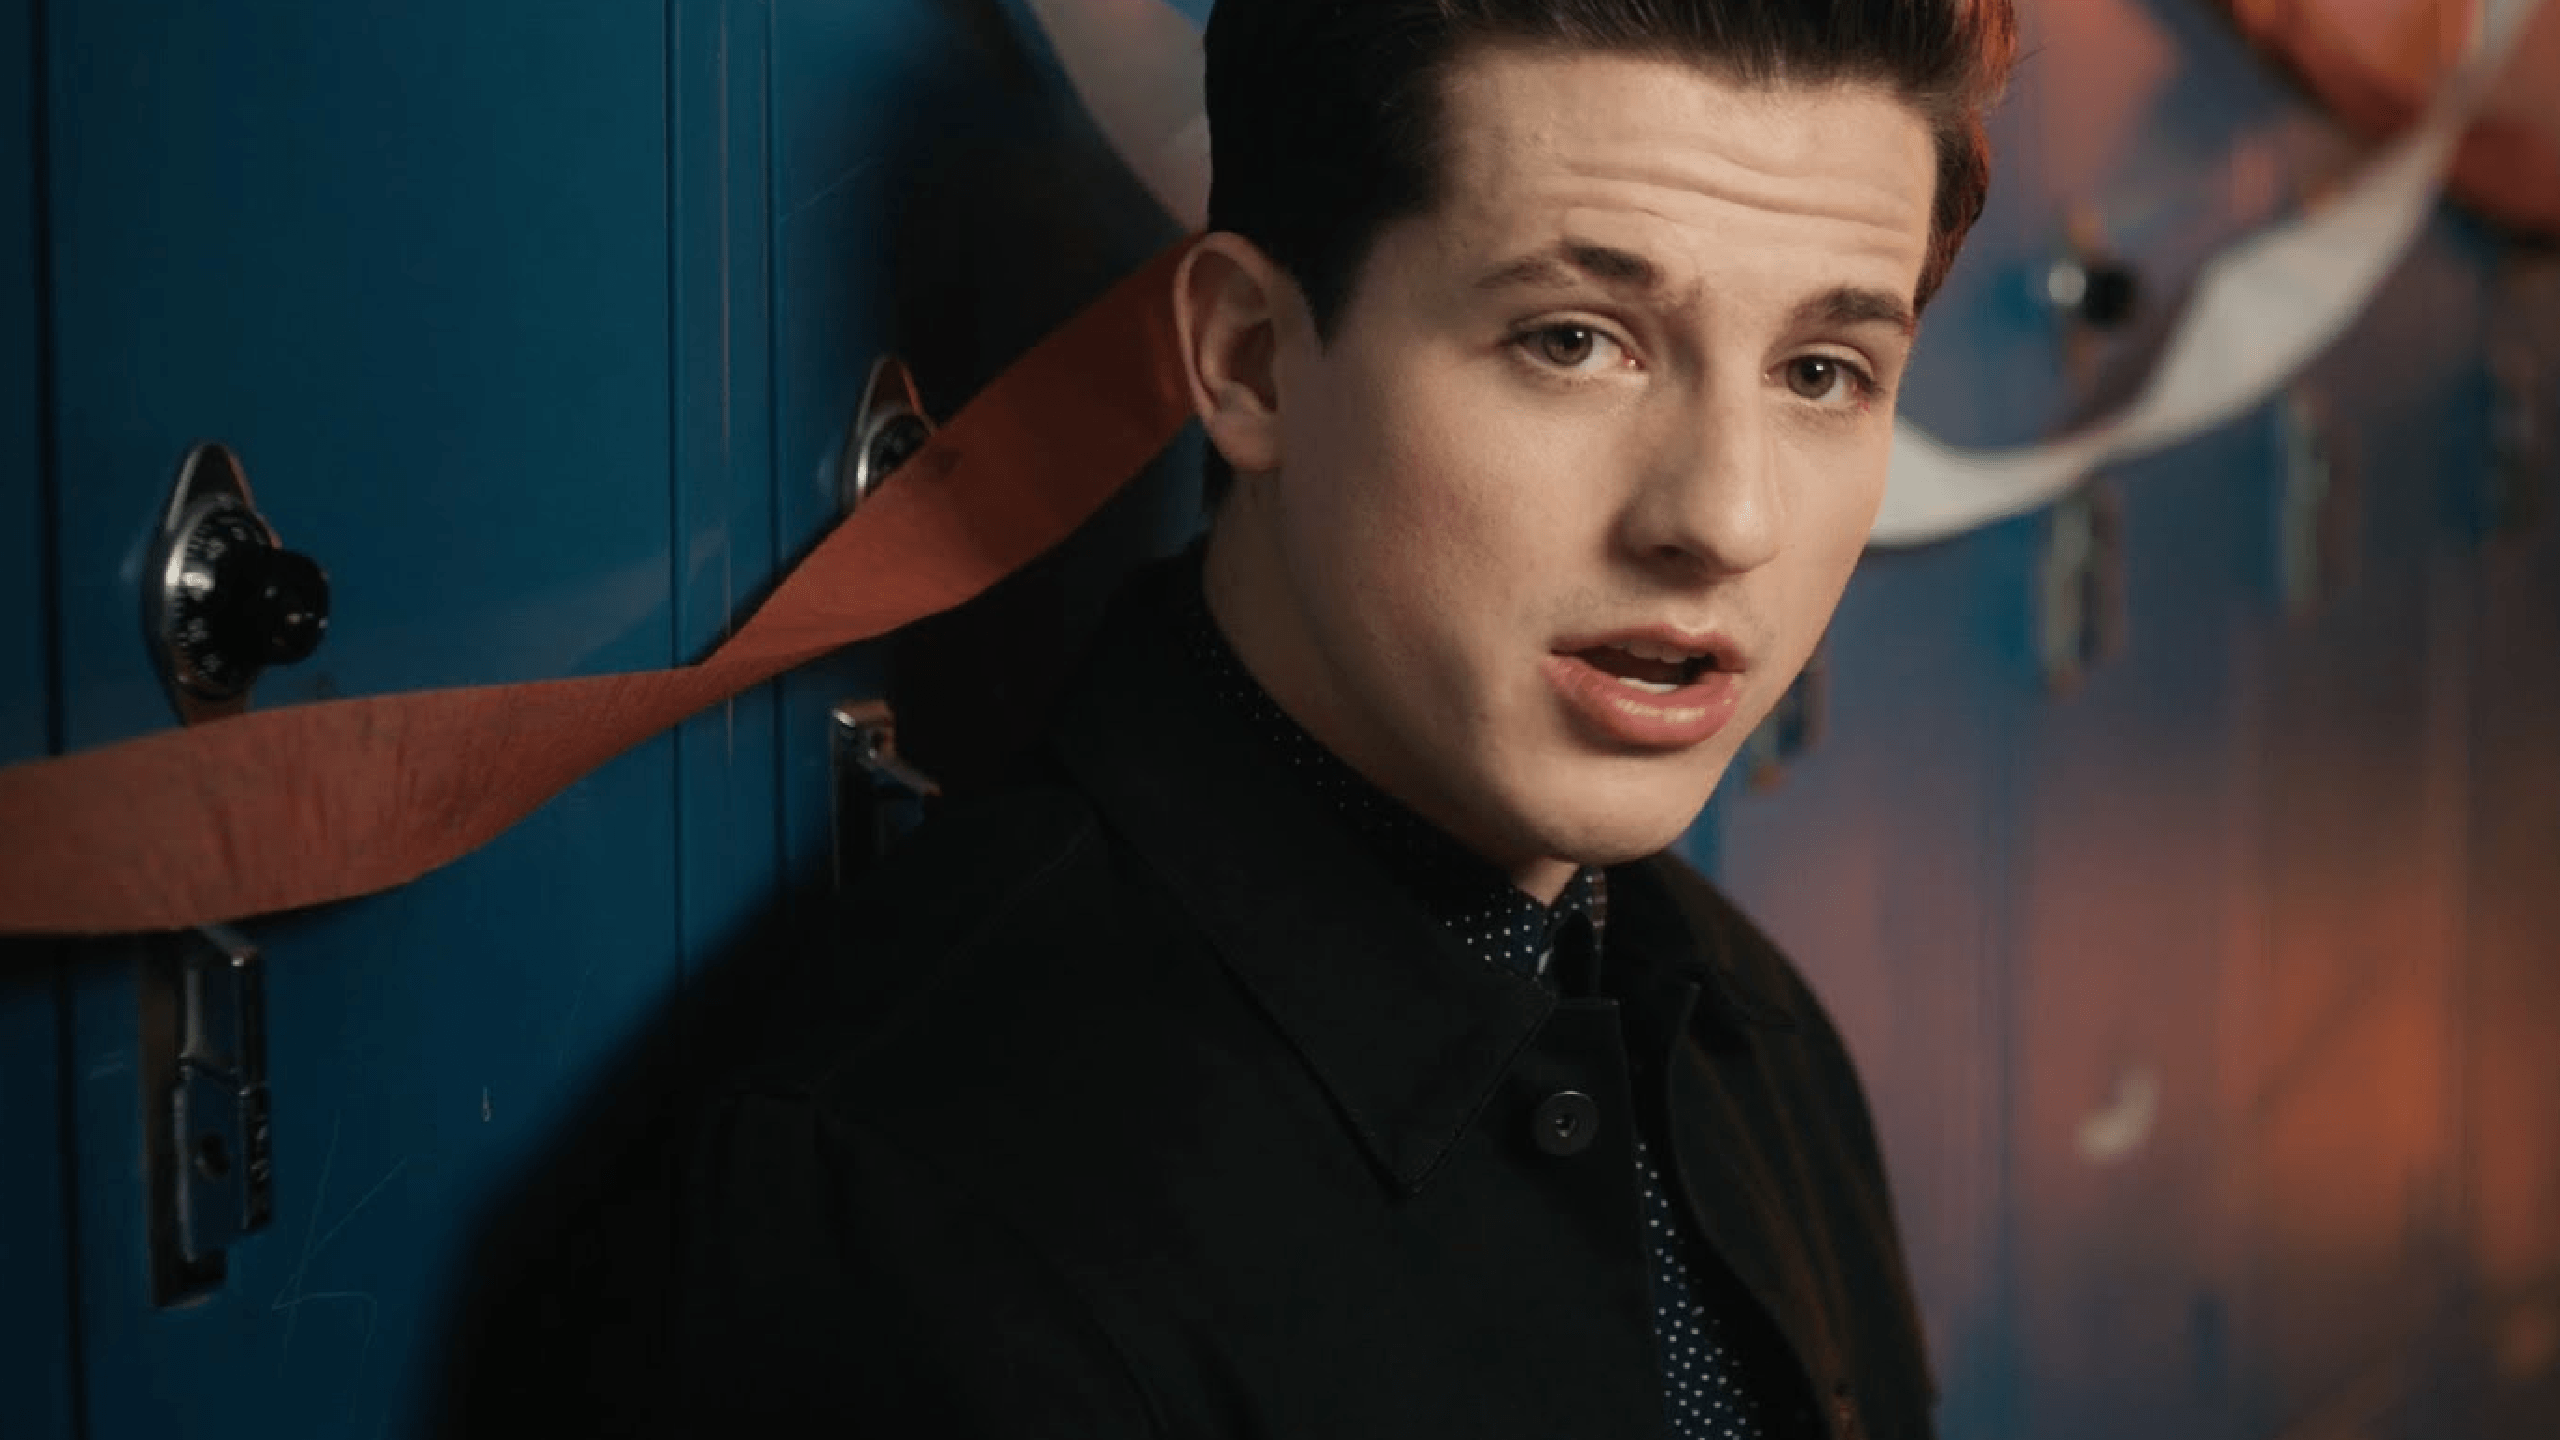 Charlie Puth tour dates 2017 2018. Charlie Puth tickets and concerts